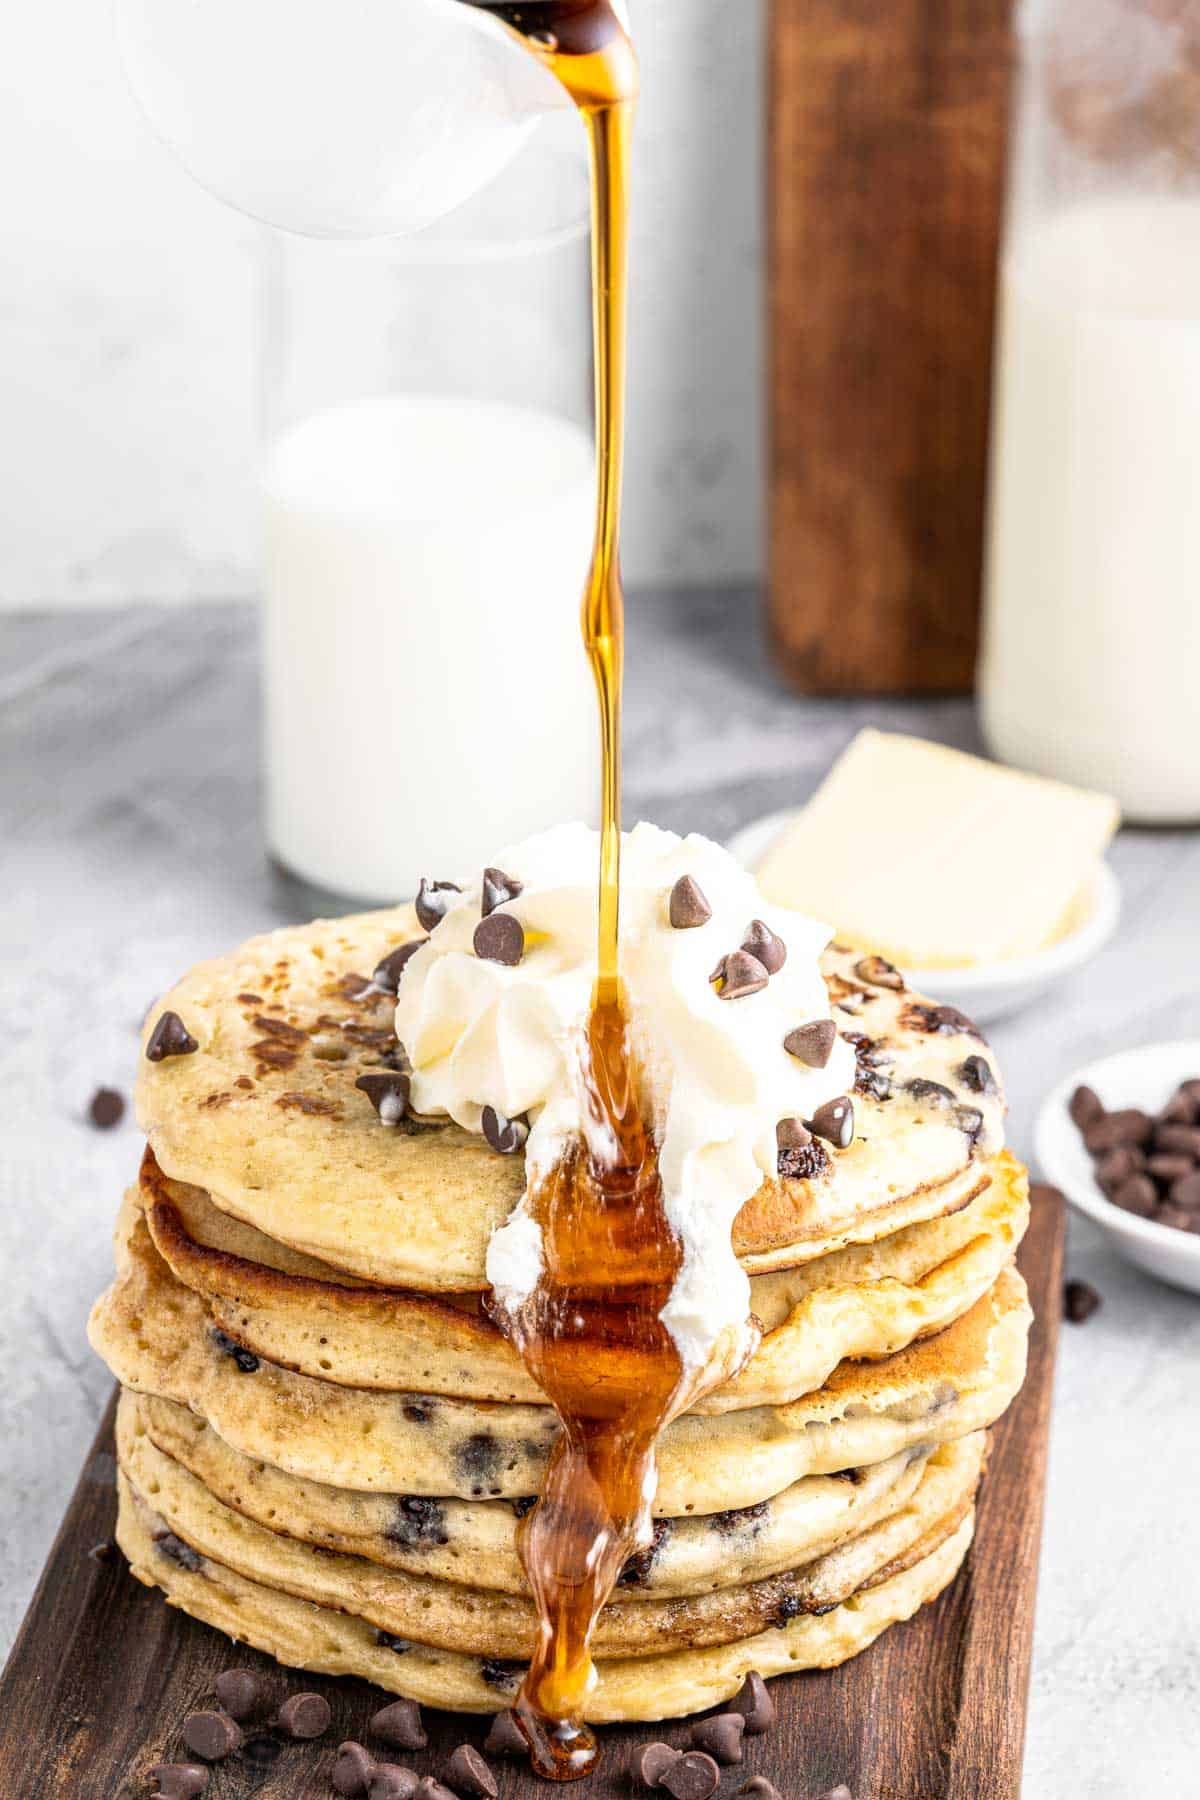 A stack of chocolate chip pancakes with syrup being poured on top.